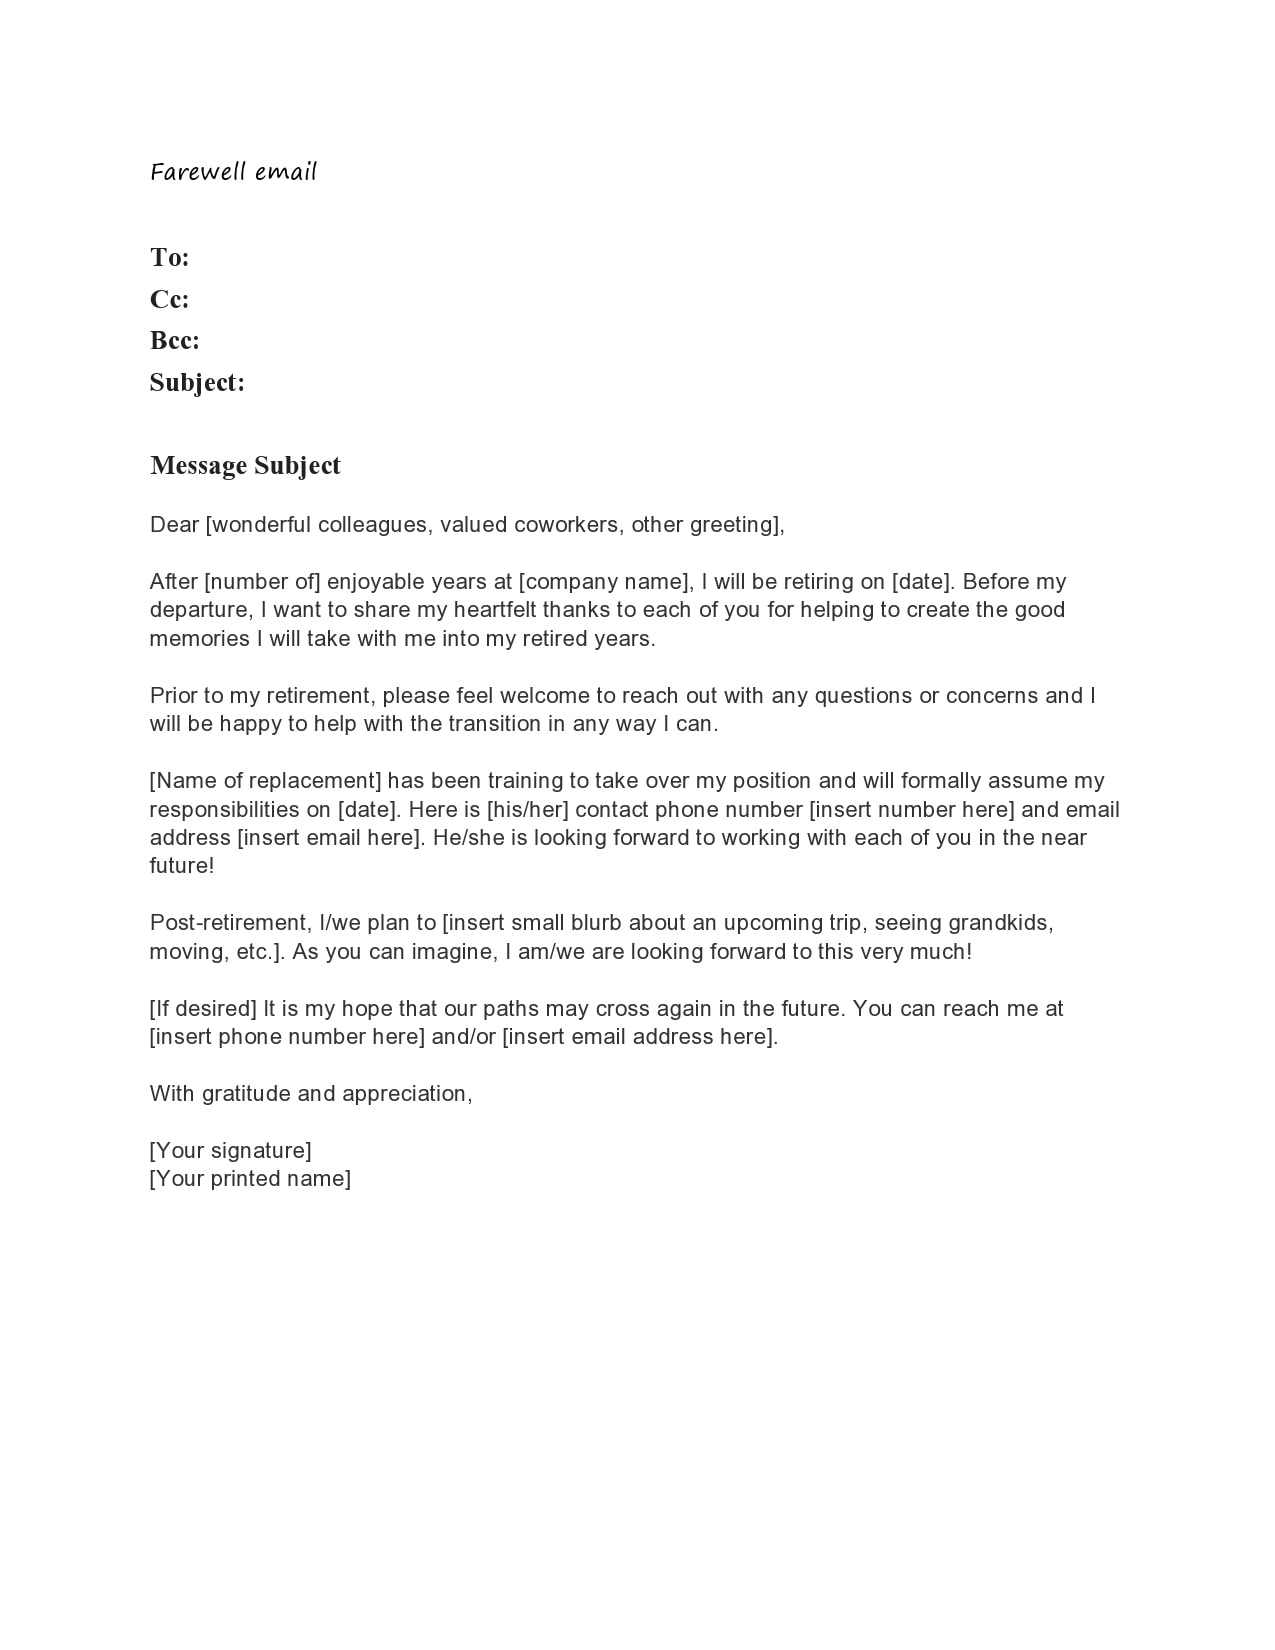 Heartfelt Resignation Letter To Coworkers from templatearchive.com